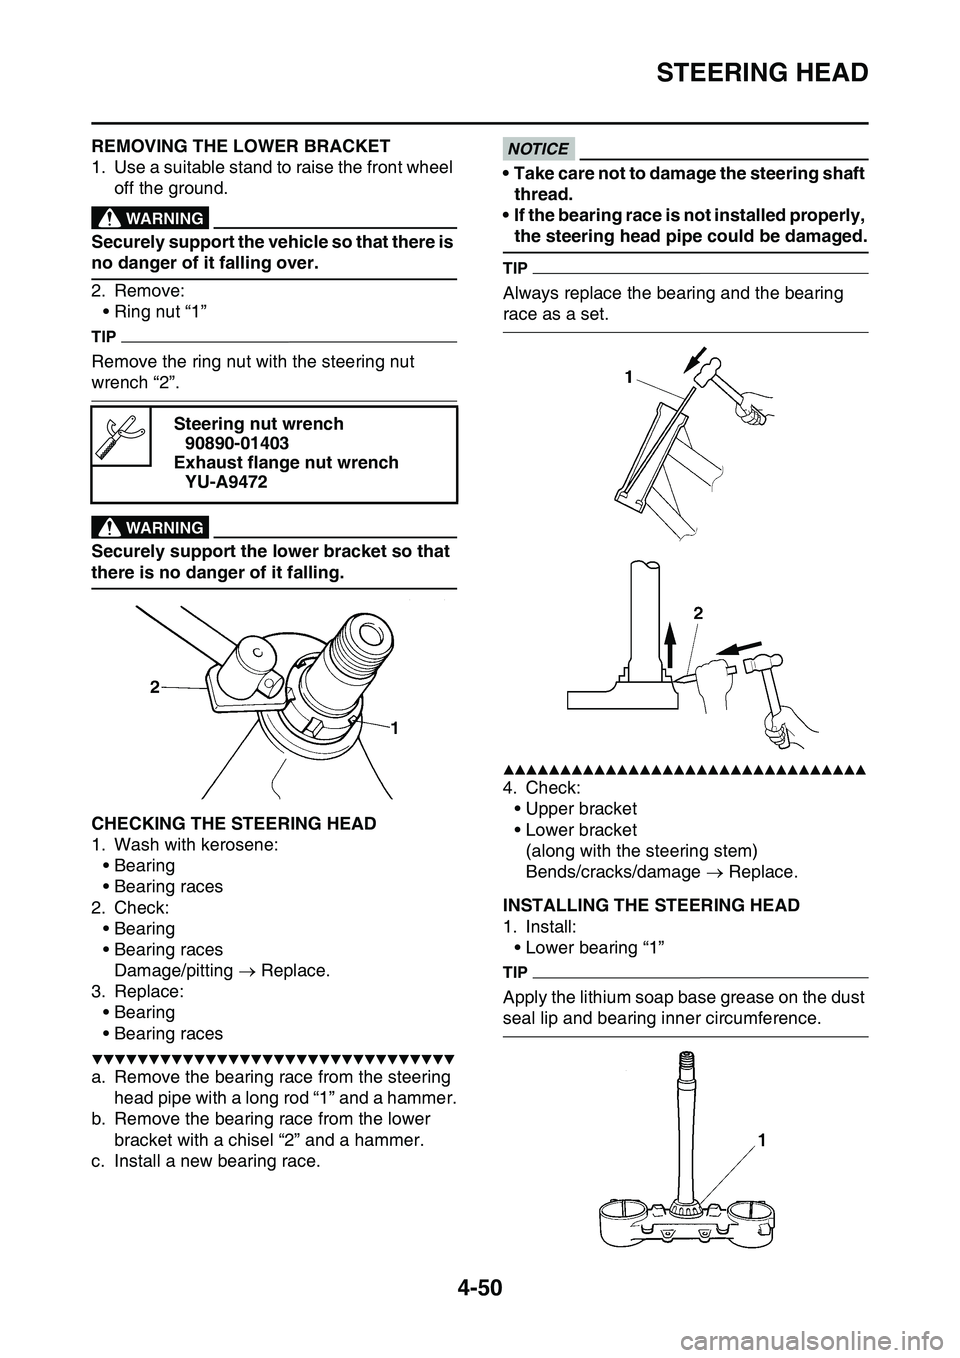 YAMAHA YZ450F 2014  Owners Manual STEERING HEAD
4-50
EAS1SL1172REMOVING THE LOWER BRACKET
1. Use a suitable stand to raise the front wheel 
off the ground.
EWA13120
WARNING
Securely support the vehicle so that there is 
no danger of i